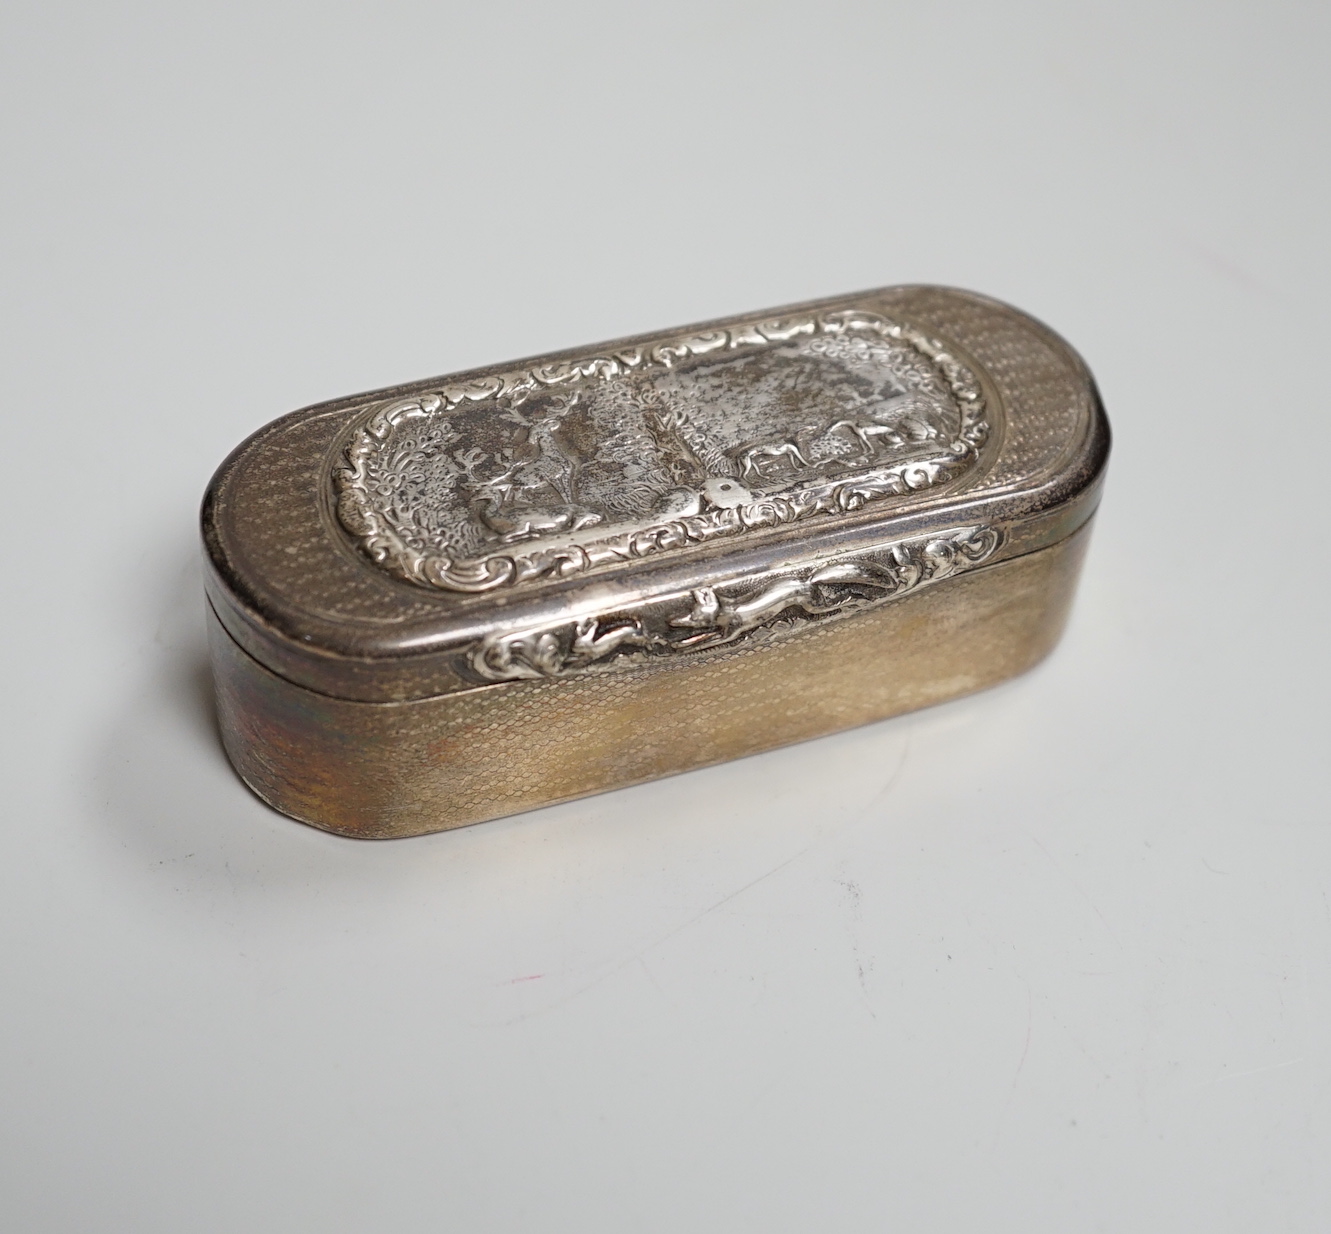 A George IV engine turned silver snuff box, the lid decorated with a panel of stags and hounds in landscapes, John Jones III, London 1824, 8.5cm, 127 grams                                                                 